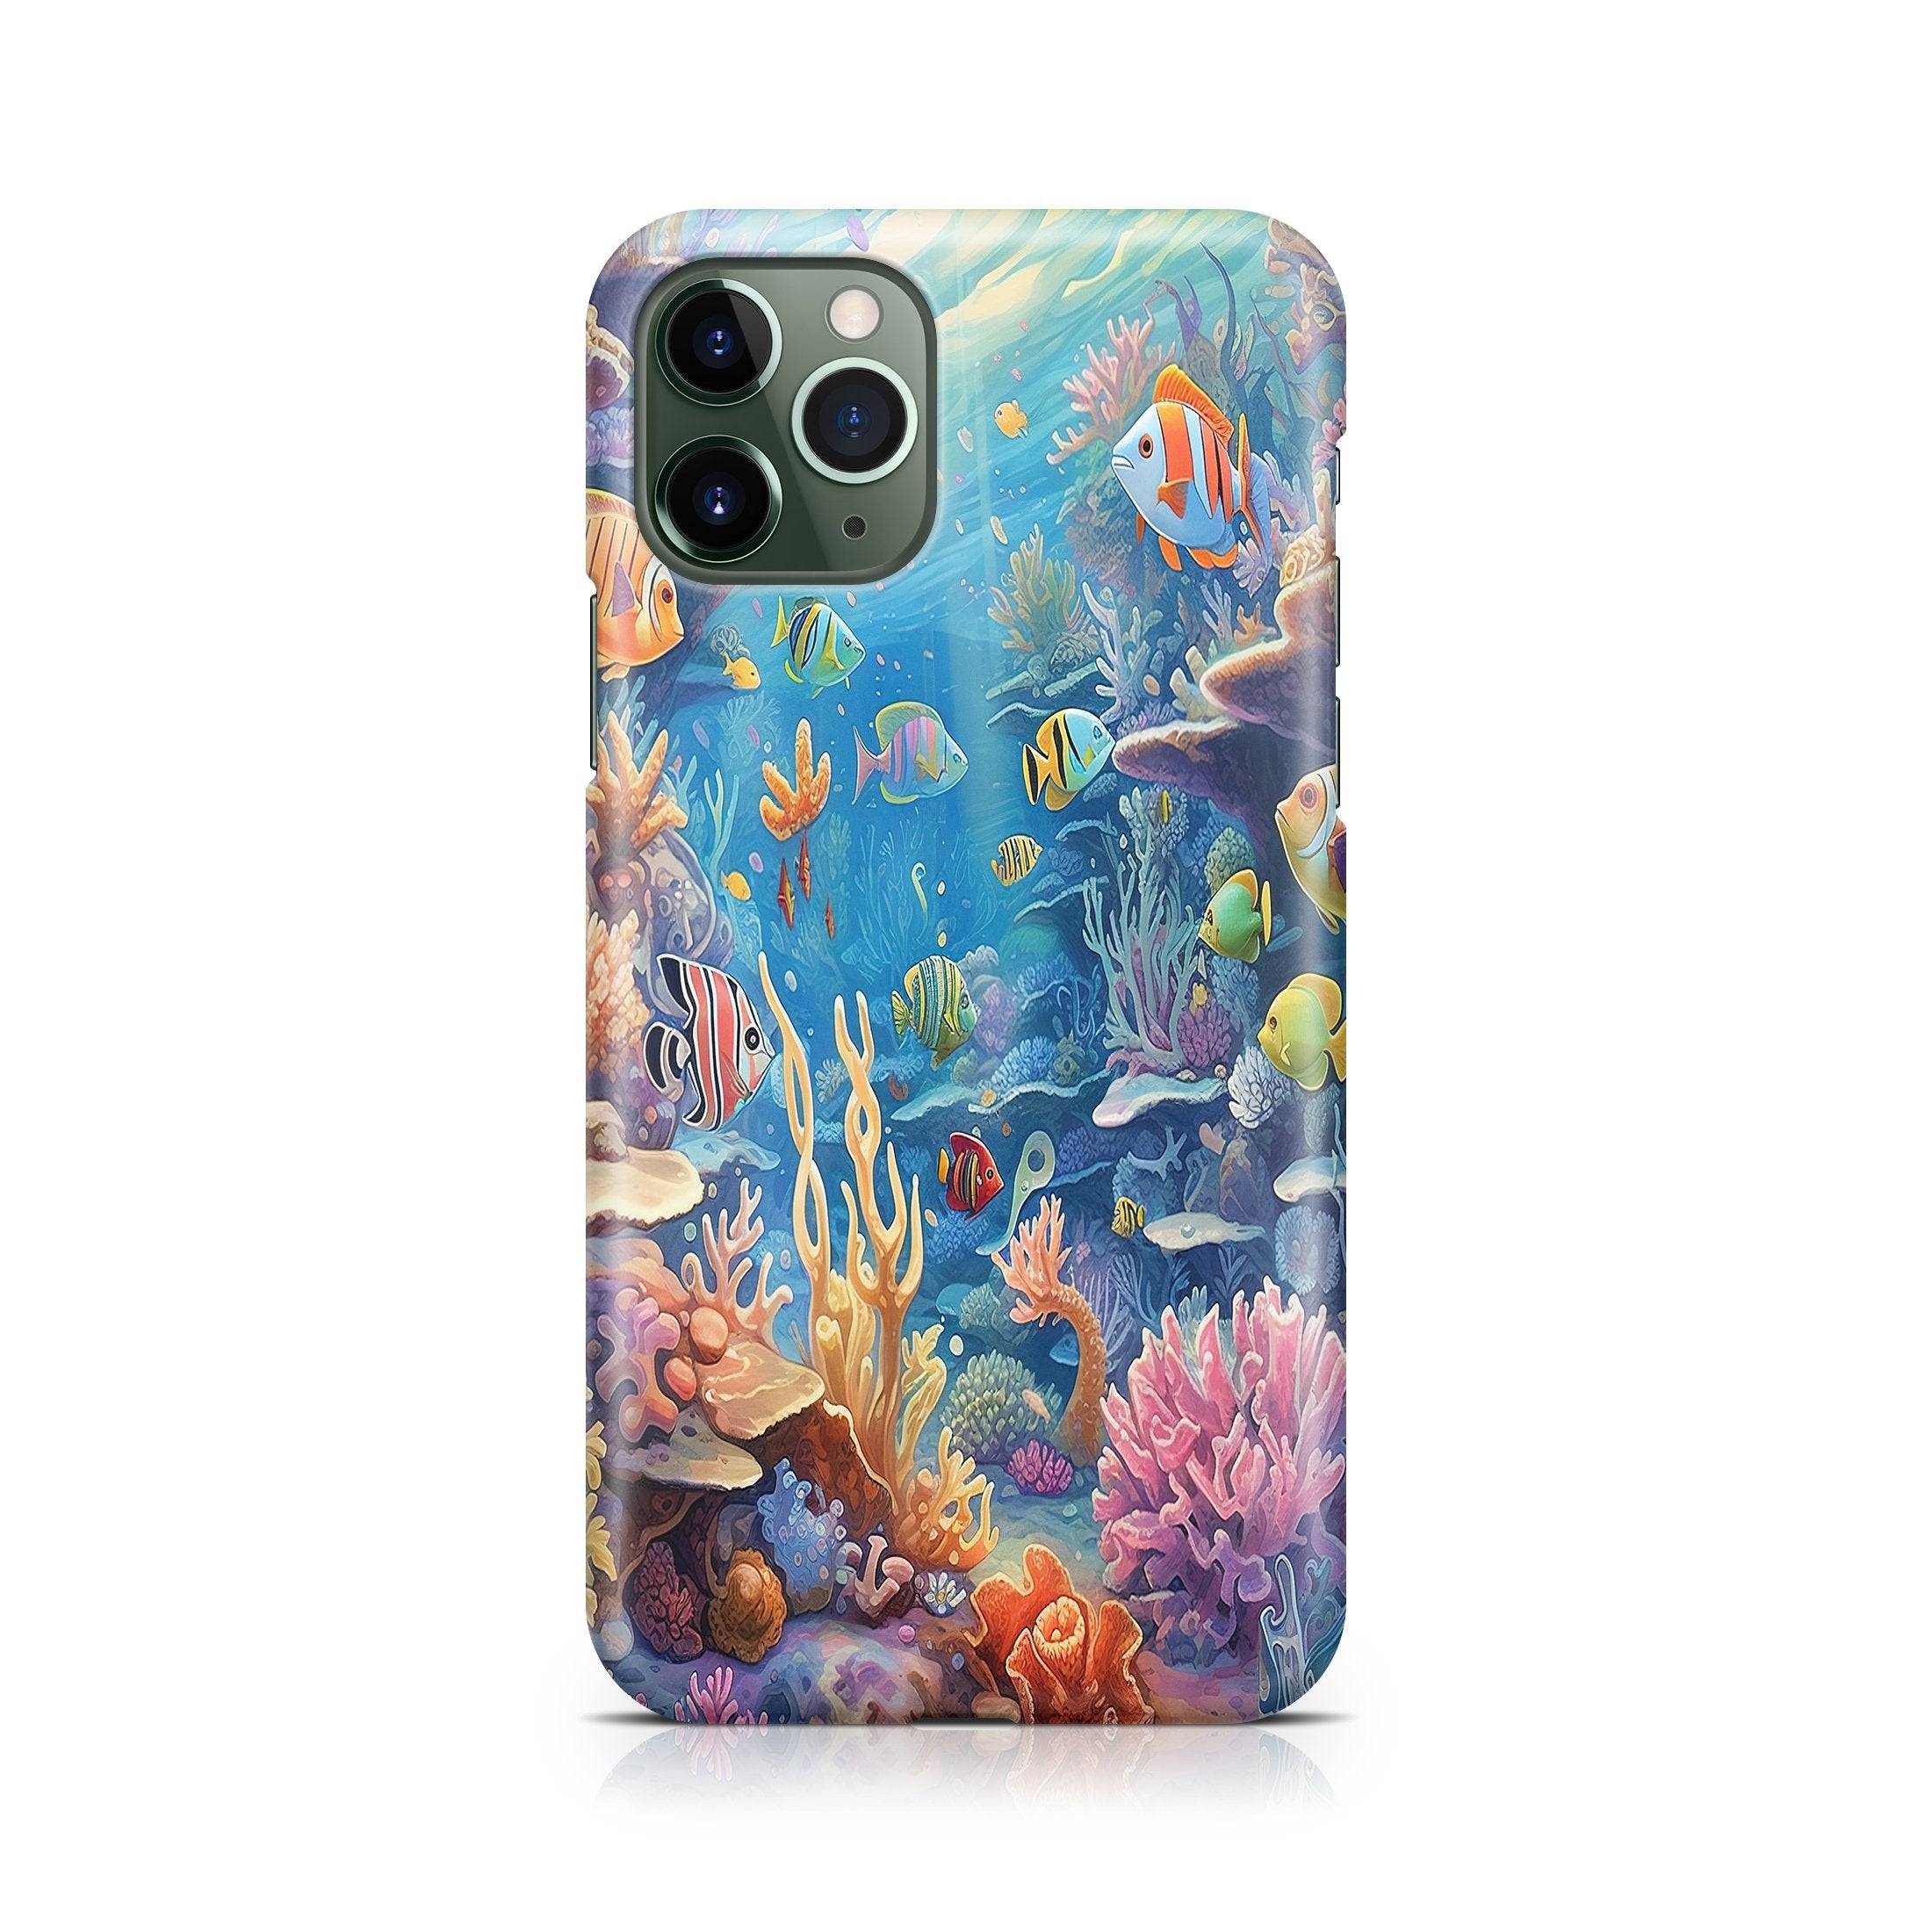 Tropical Eden - iPhone phone case designs by CaseSwagger